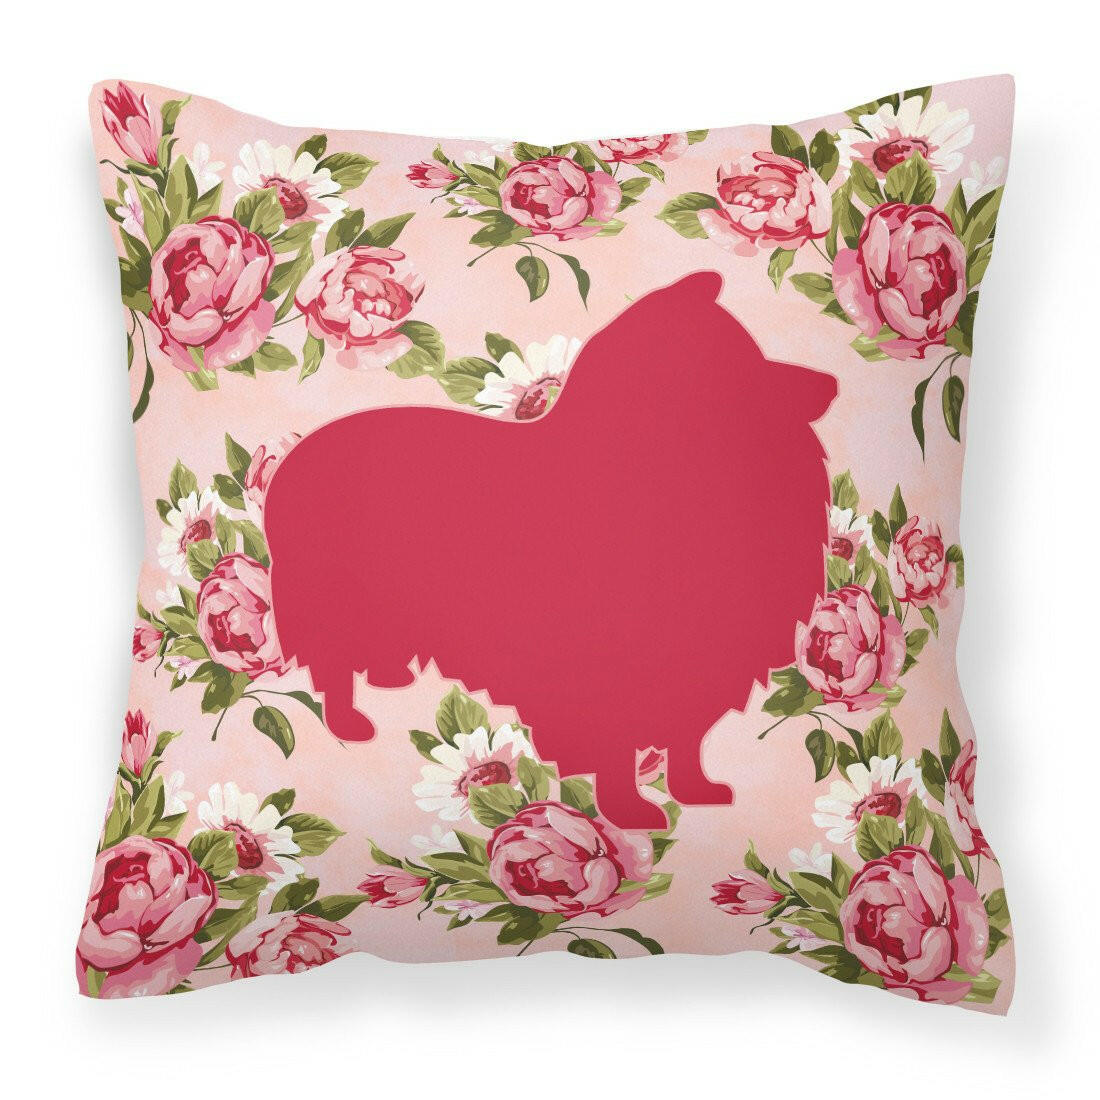 Sheltie Shabby Chic Pink Roses  Fabric Decorative Pillow BB1080-RS-PK-PW1414 - the-store.com